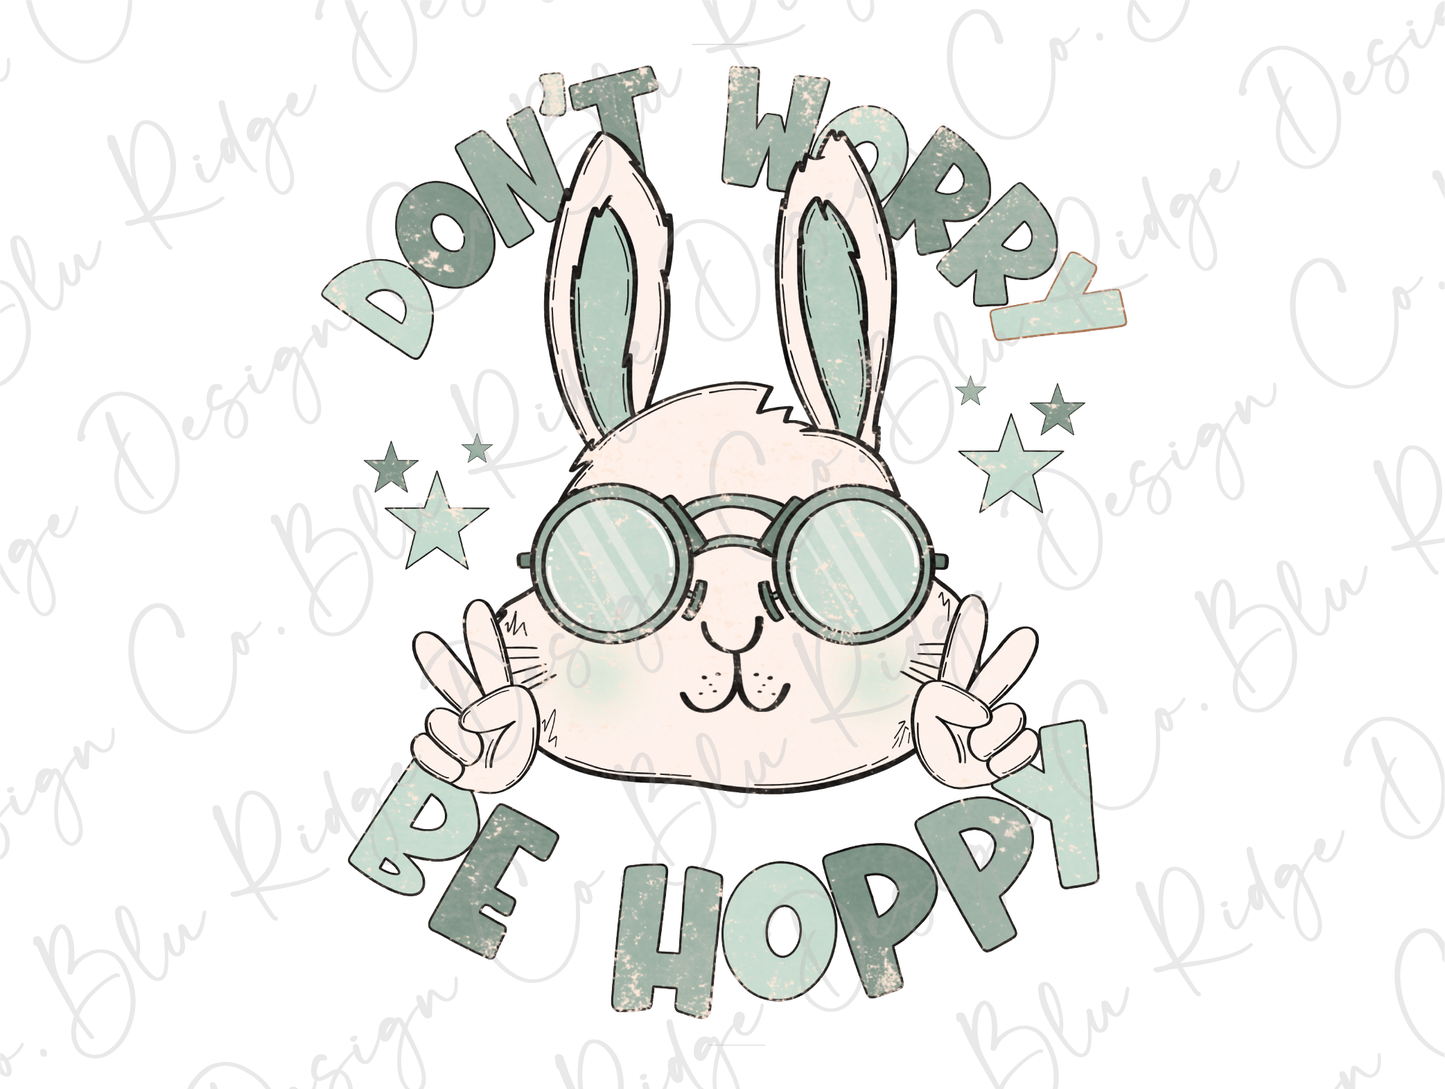 Don't Worry be Hoppy boy cool Easter bunny Direct To Film (DTF) Transfer